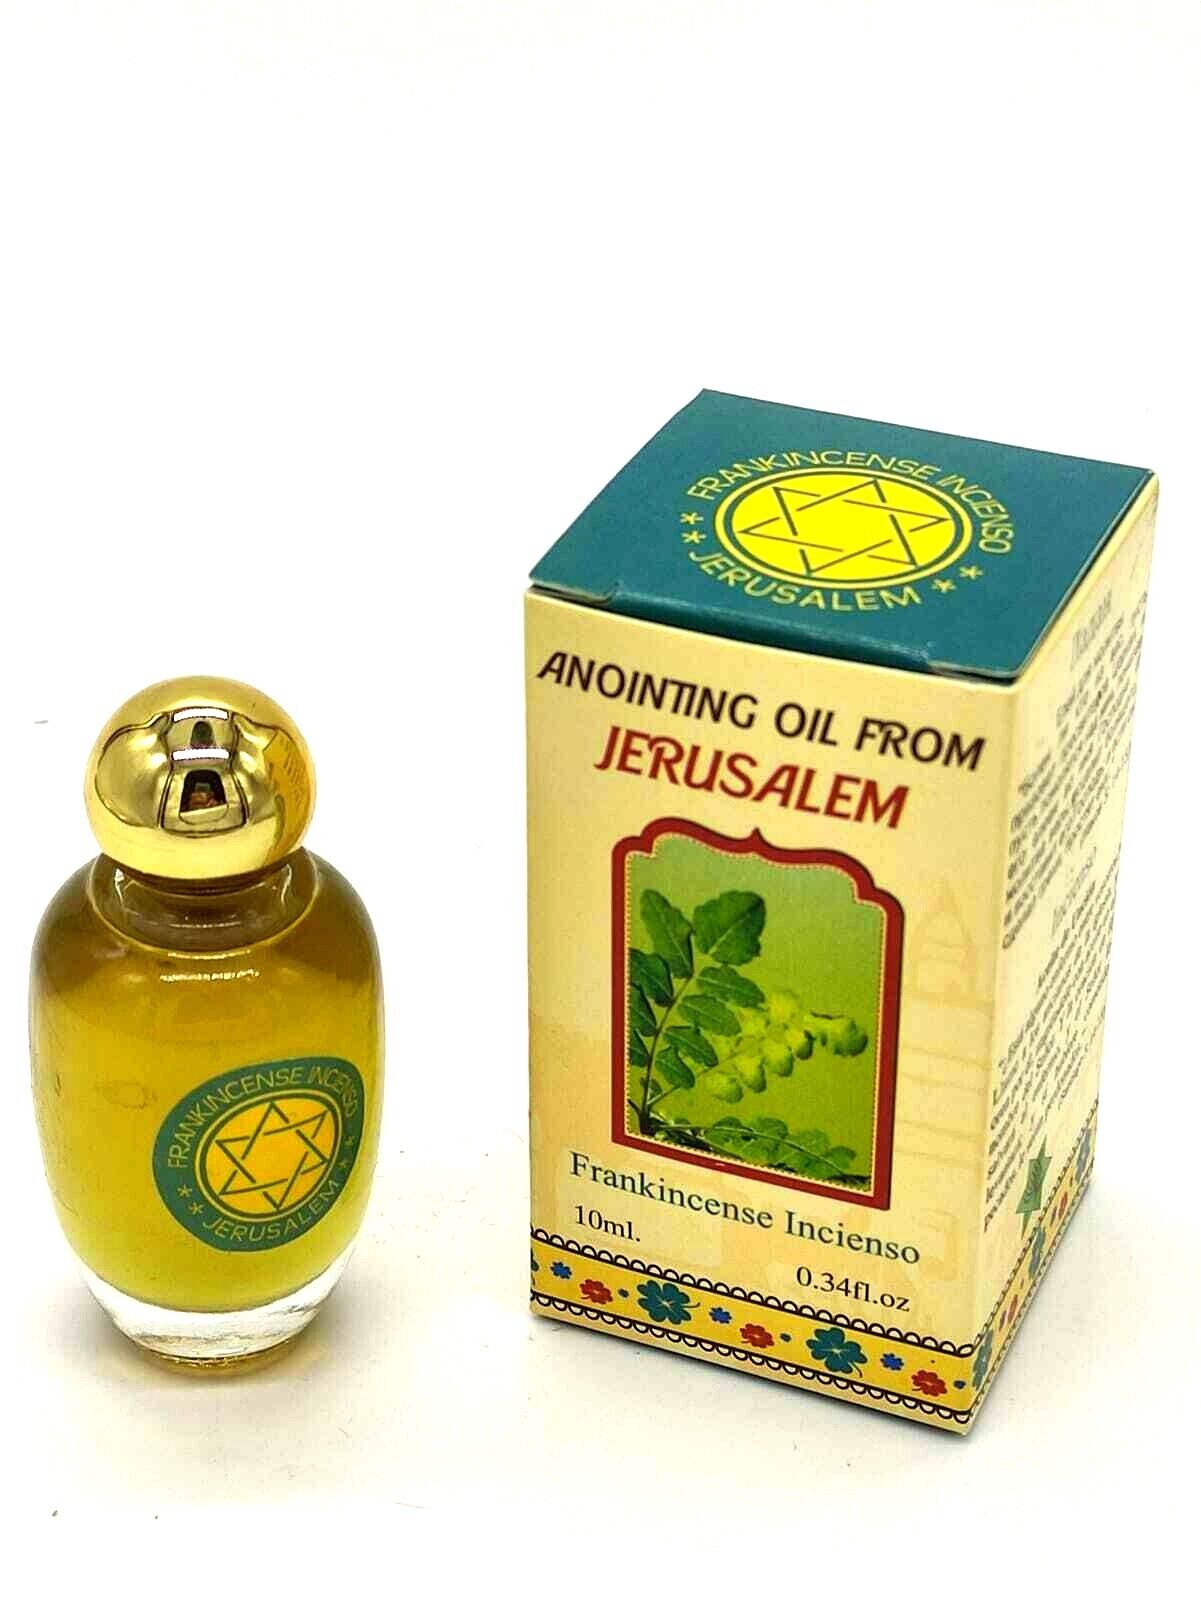 Blessed Anointing Oil Jerusalem Holy Land Frankincense Incienso 0.34oz/10ml Gift